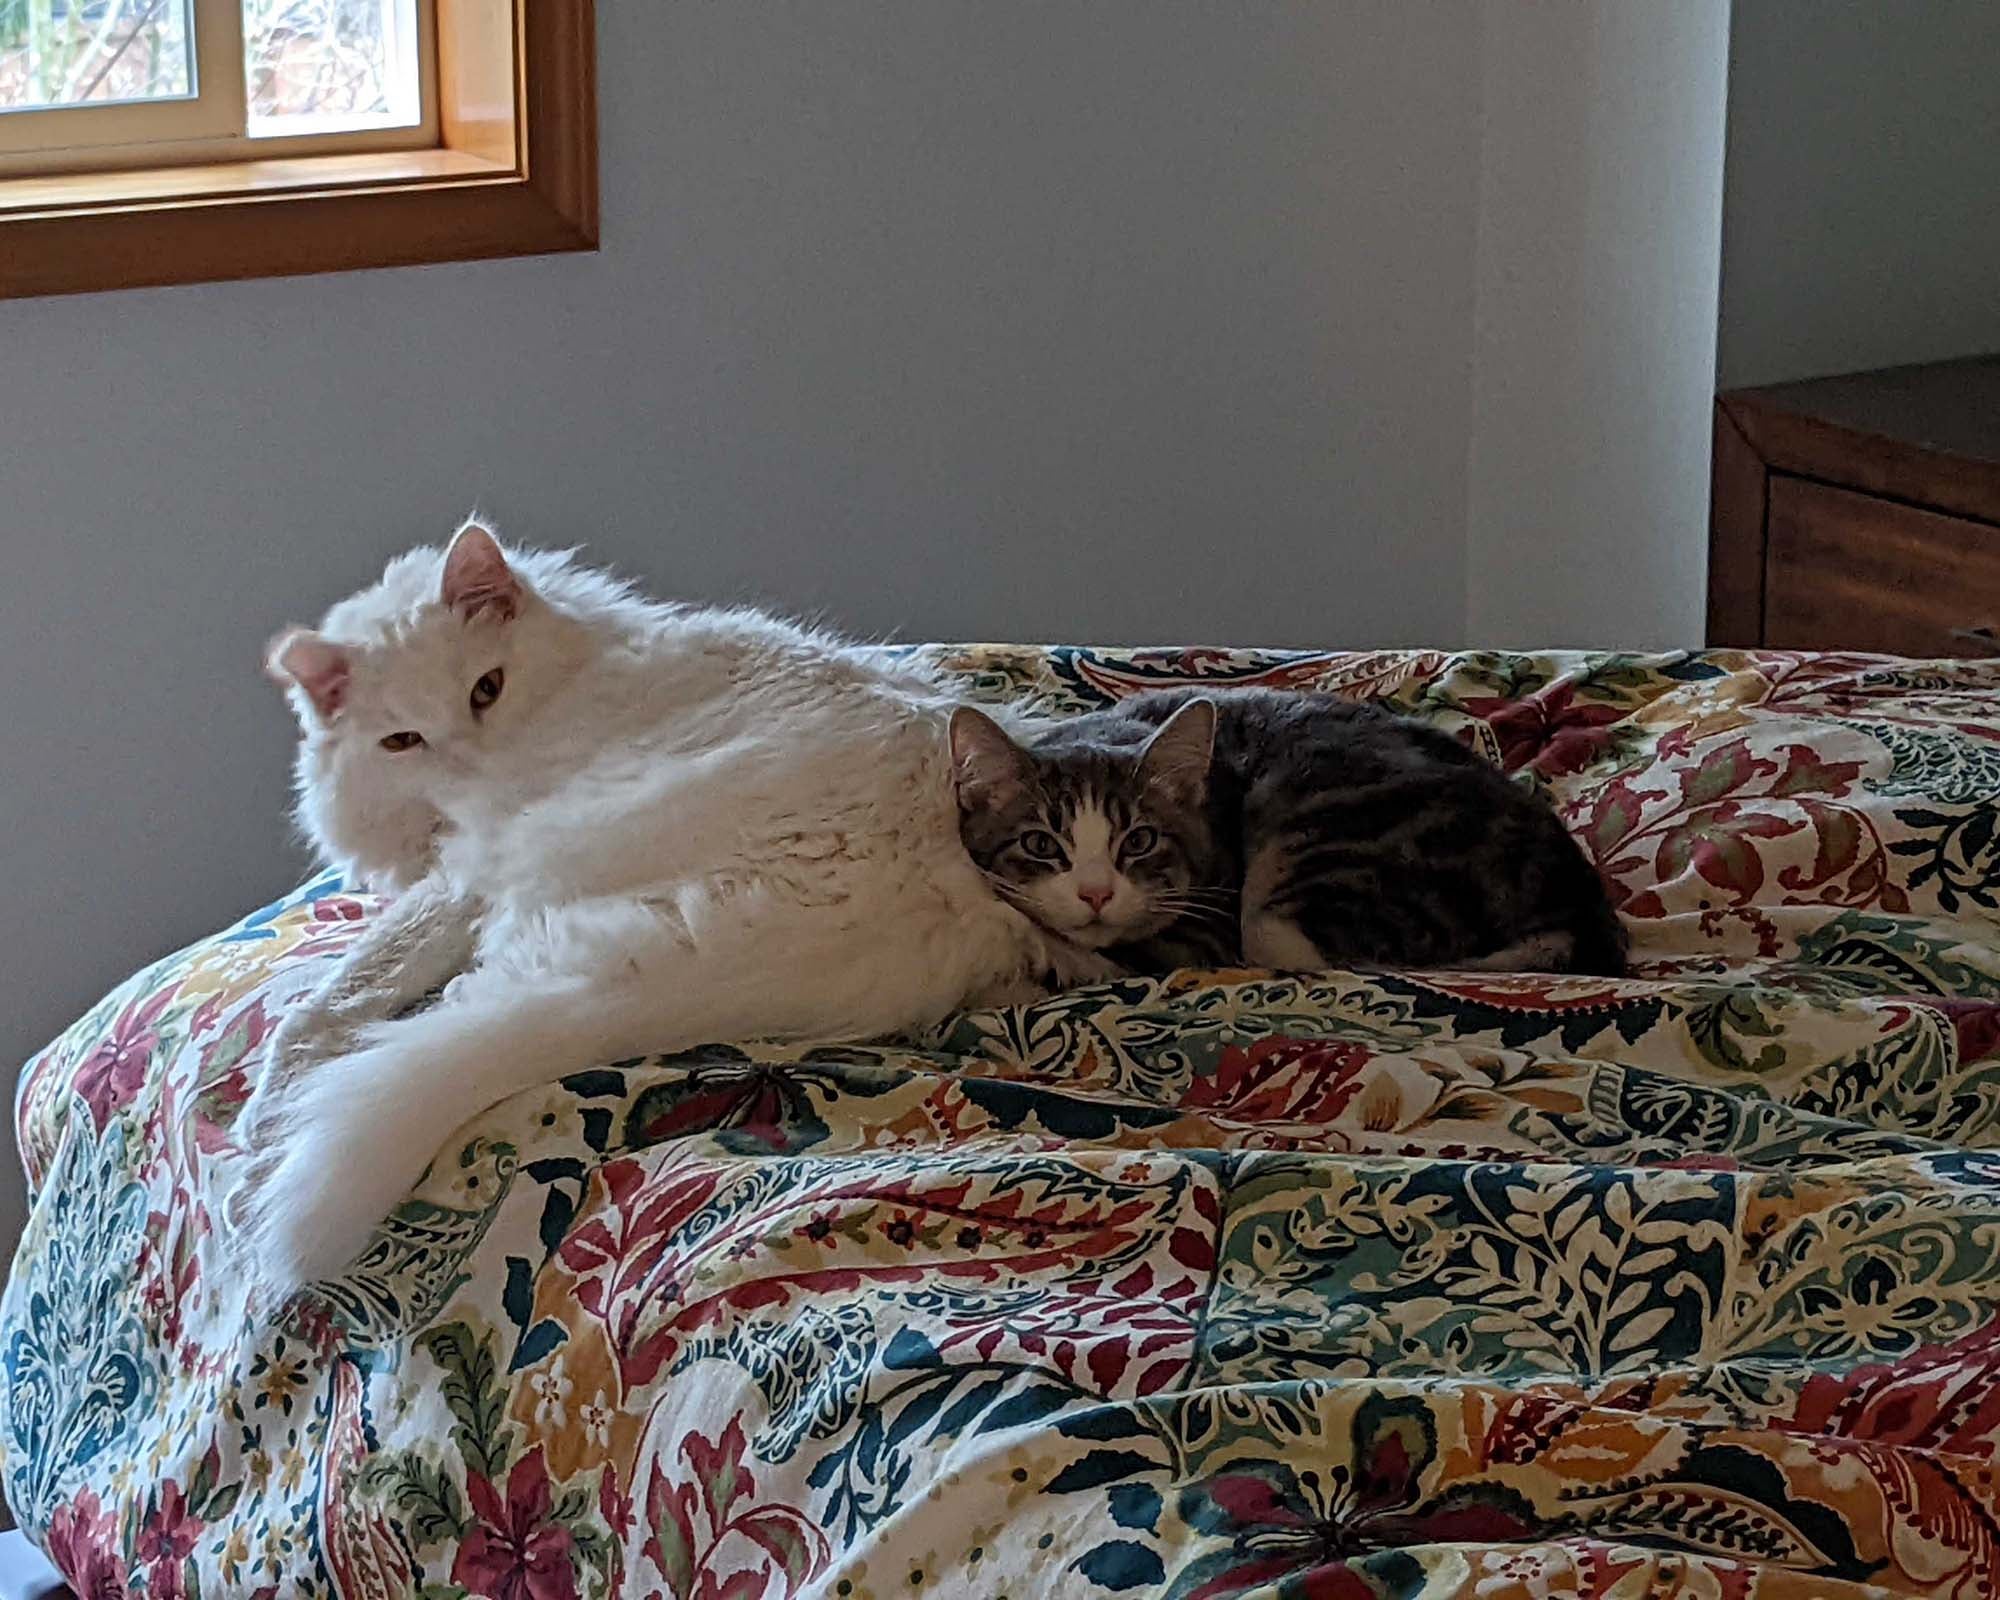 Hilda, the fluffy white Turkish Angora cat and Jura, the brown and white American Shorthair cat snuggling on a bed